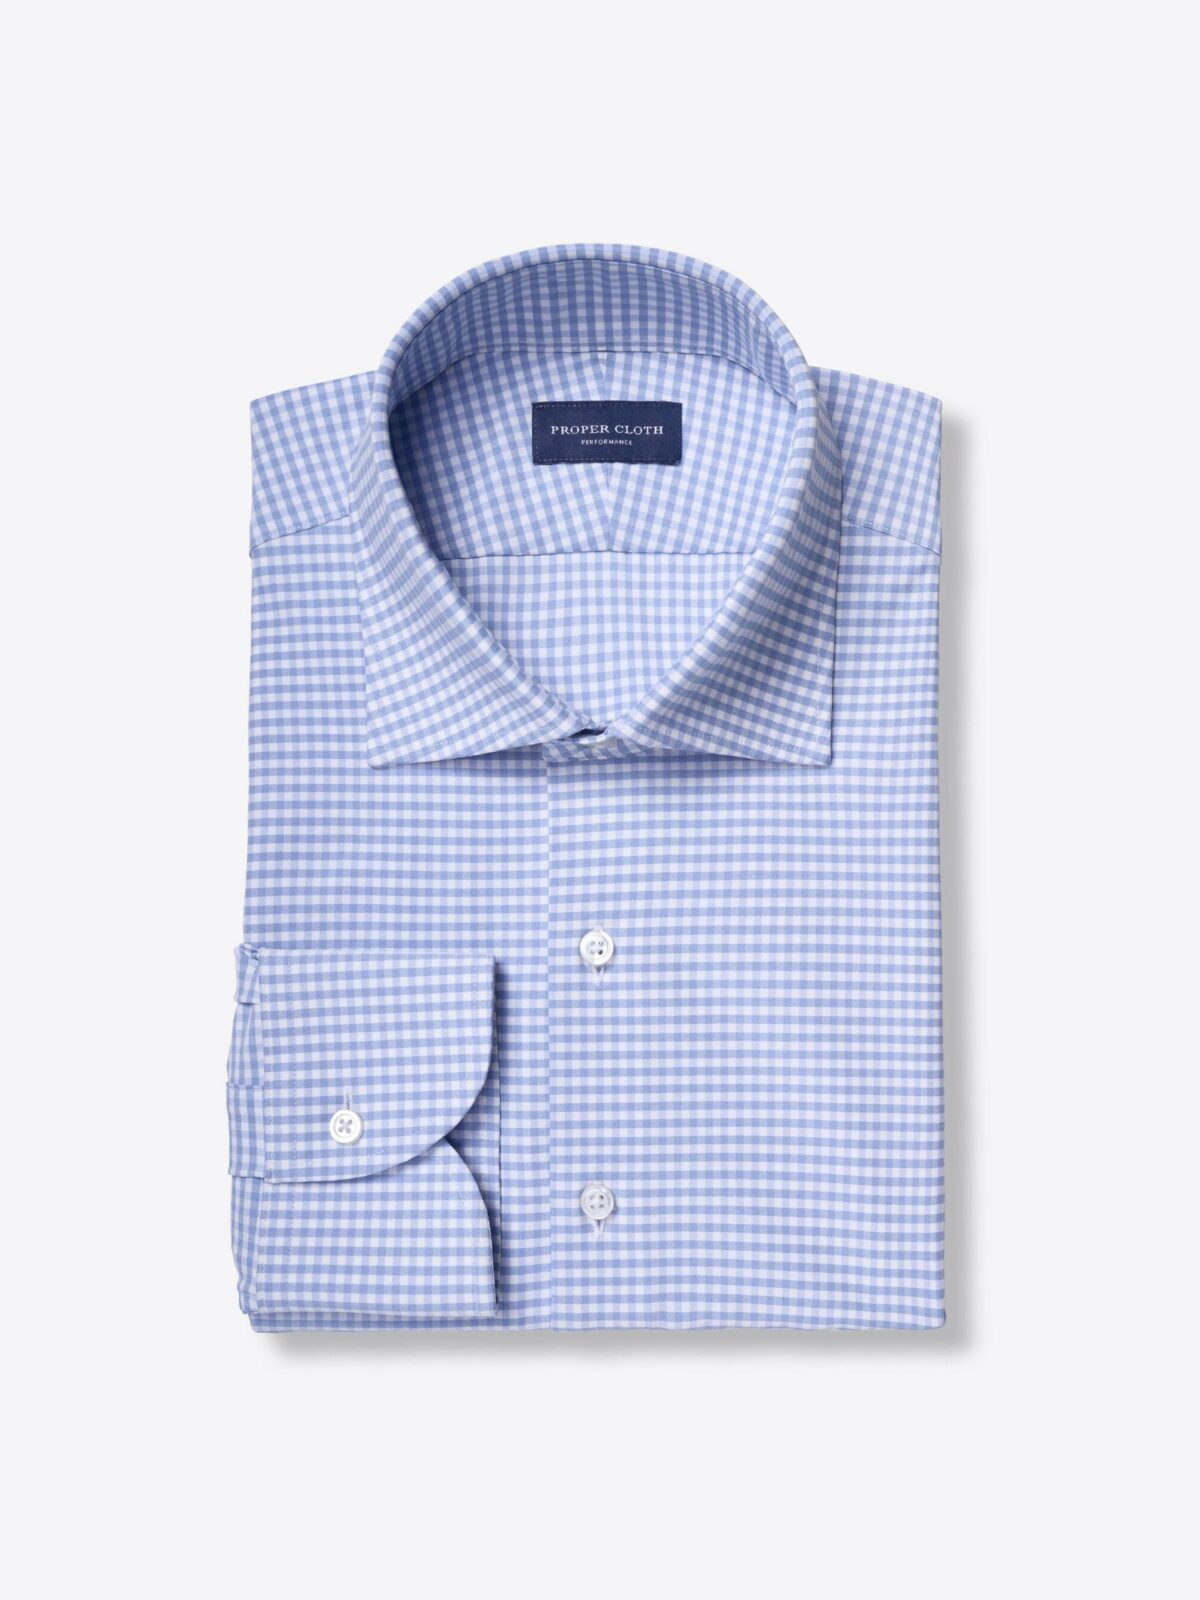 Recycled Cotton Free Performance Light Blue Gingham Shirt by Proper Cloth